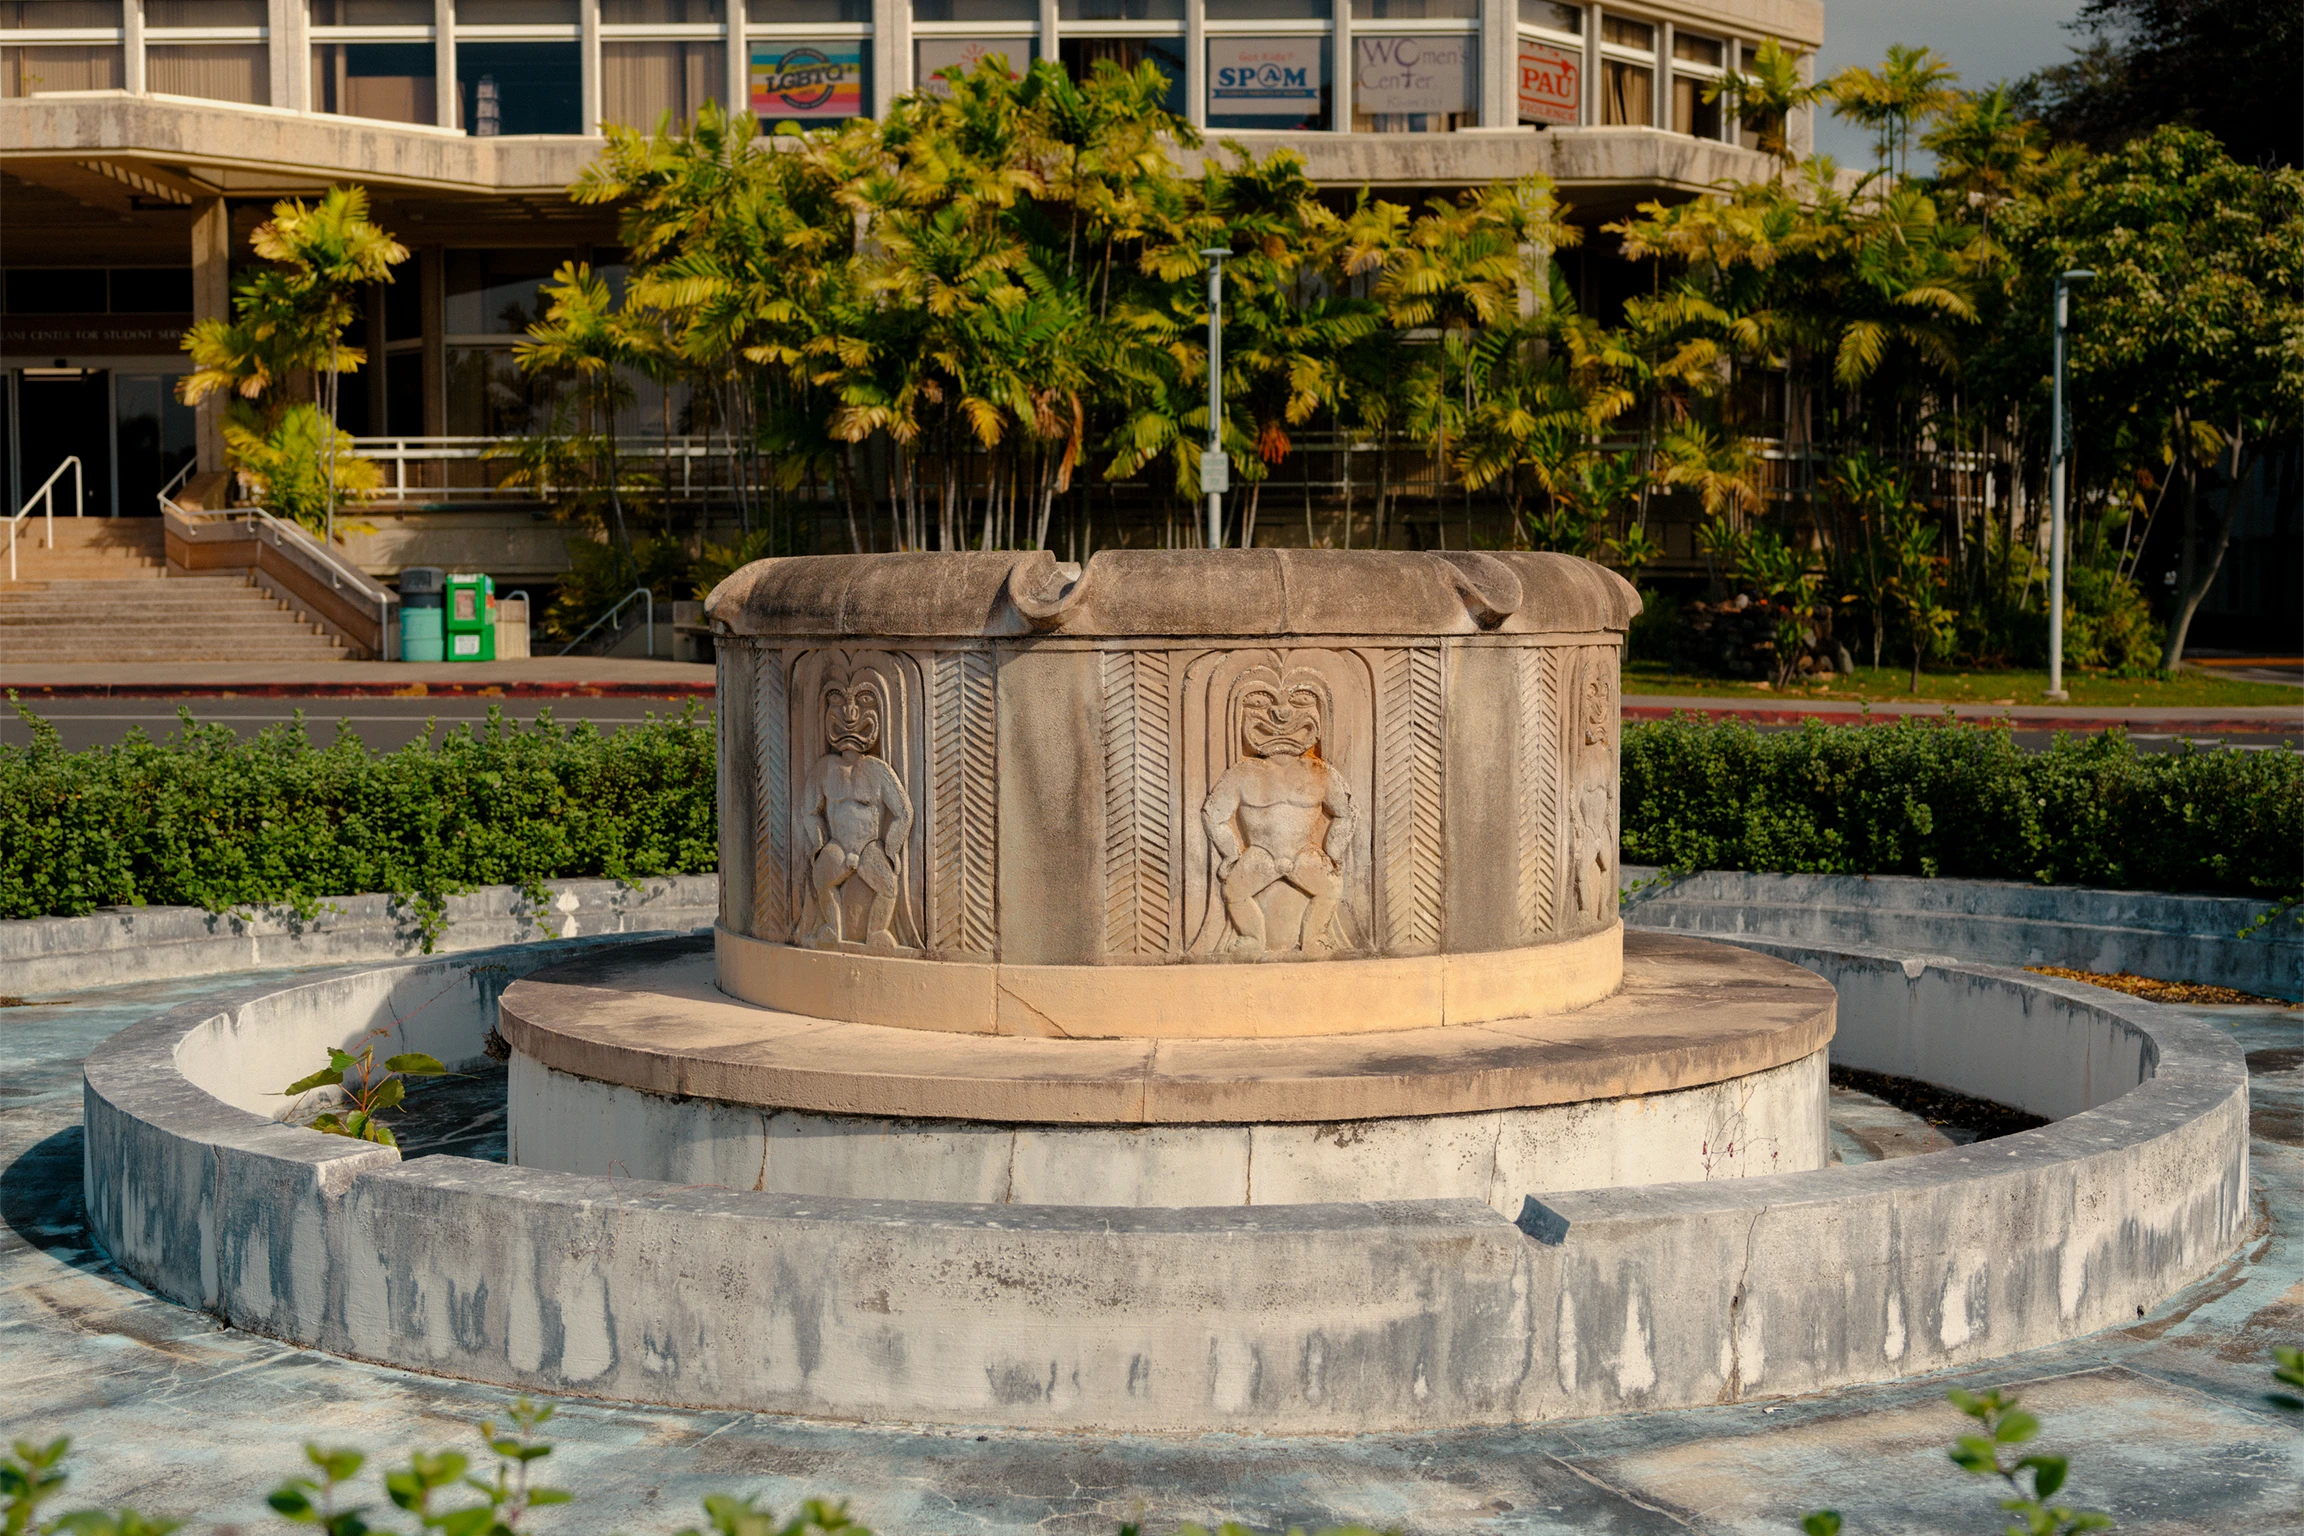 An empty round stone fountain with carved native Hawai'an designs on its sides among greenery at the University of Hawai'i at Mānoa